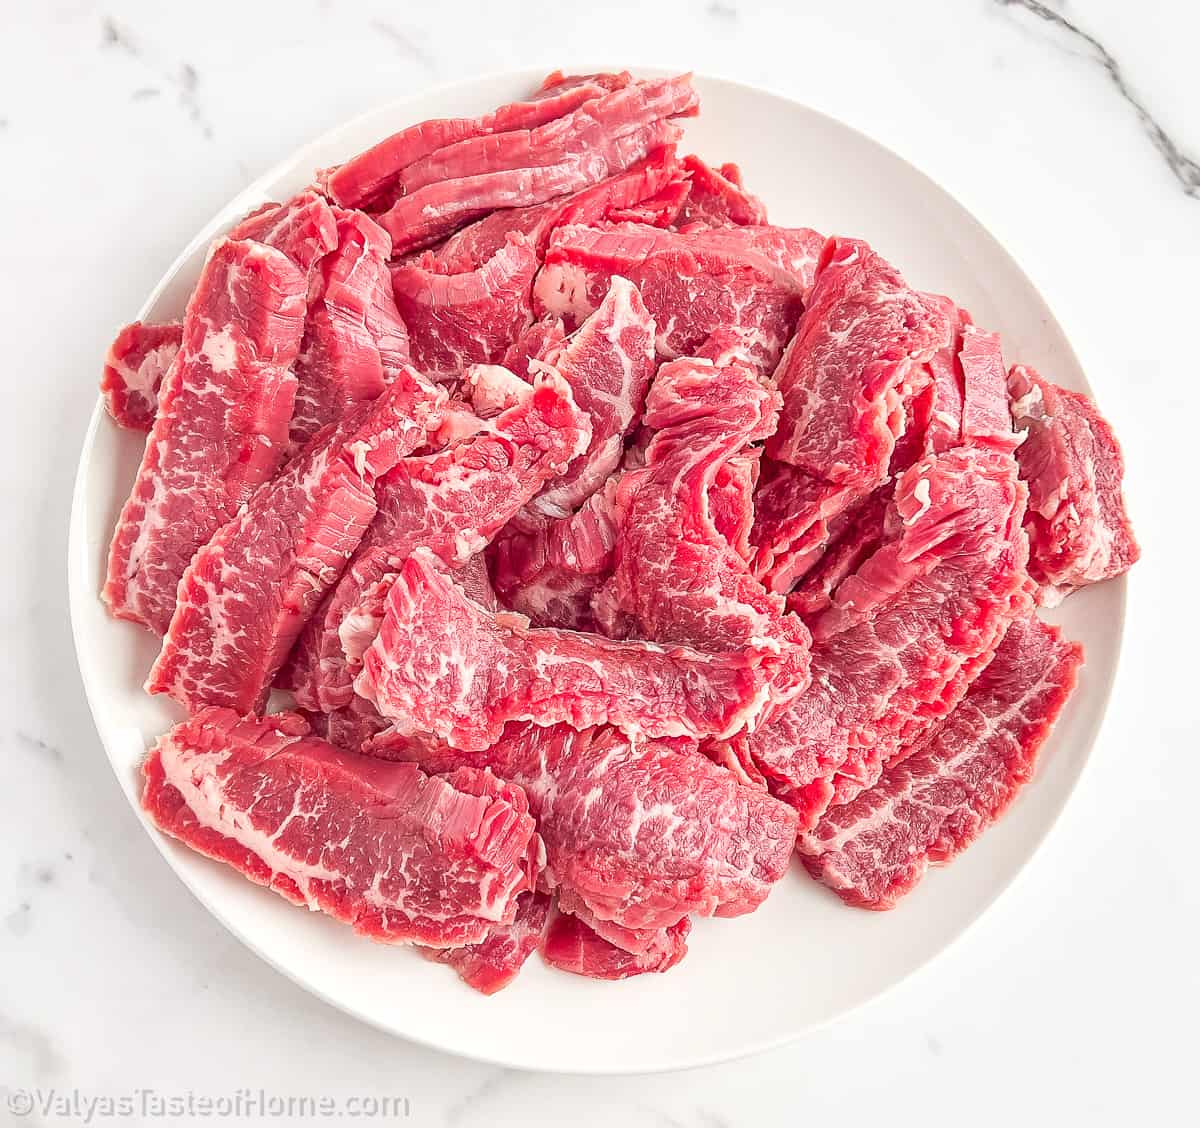 You need to carefully slice the sirloin steak thinly across the grain. Doing so will help ensure that your beef is tender and absorbs the flavor well.